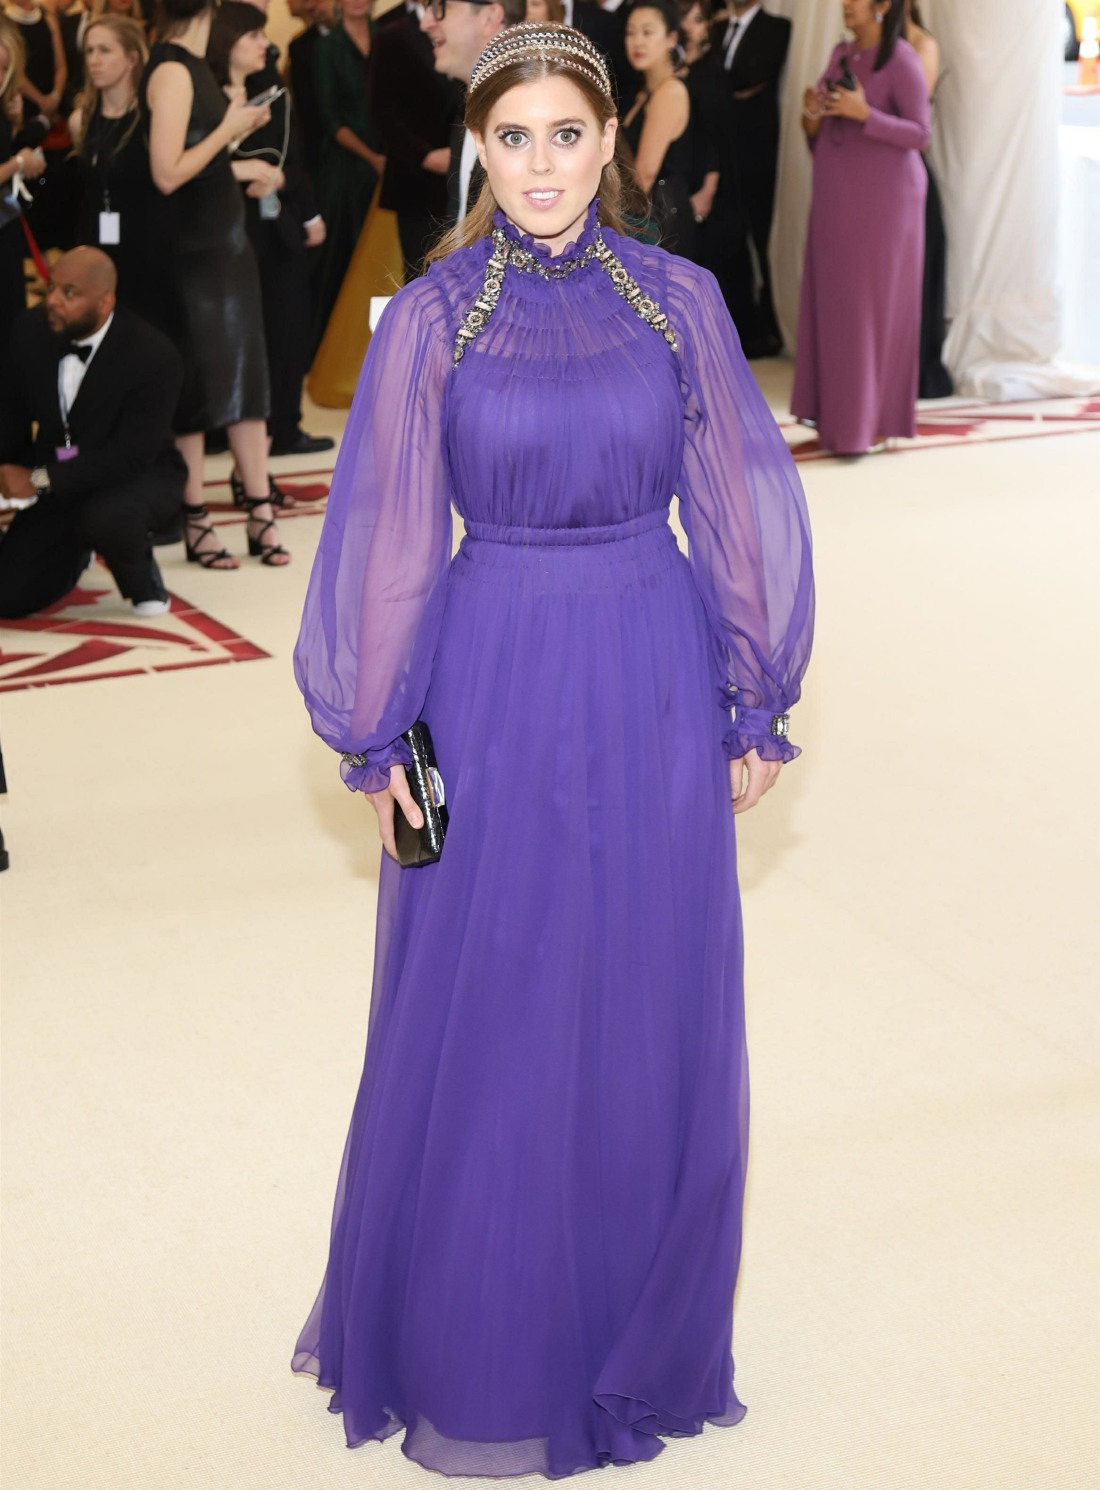 Princess Beatrice of York arrives at the 2018 Costume Institute Gala in New York City